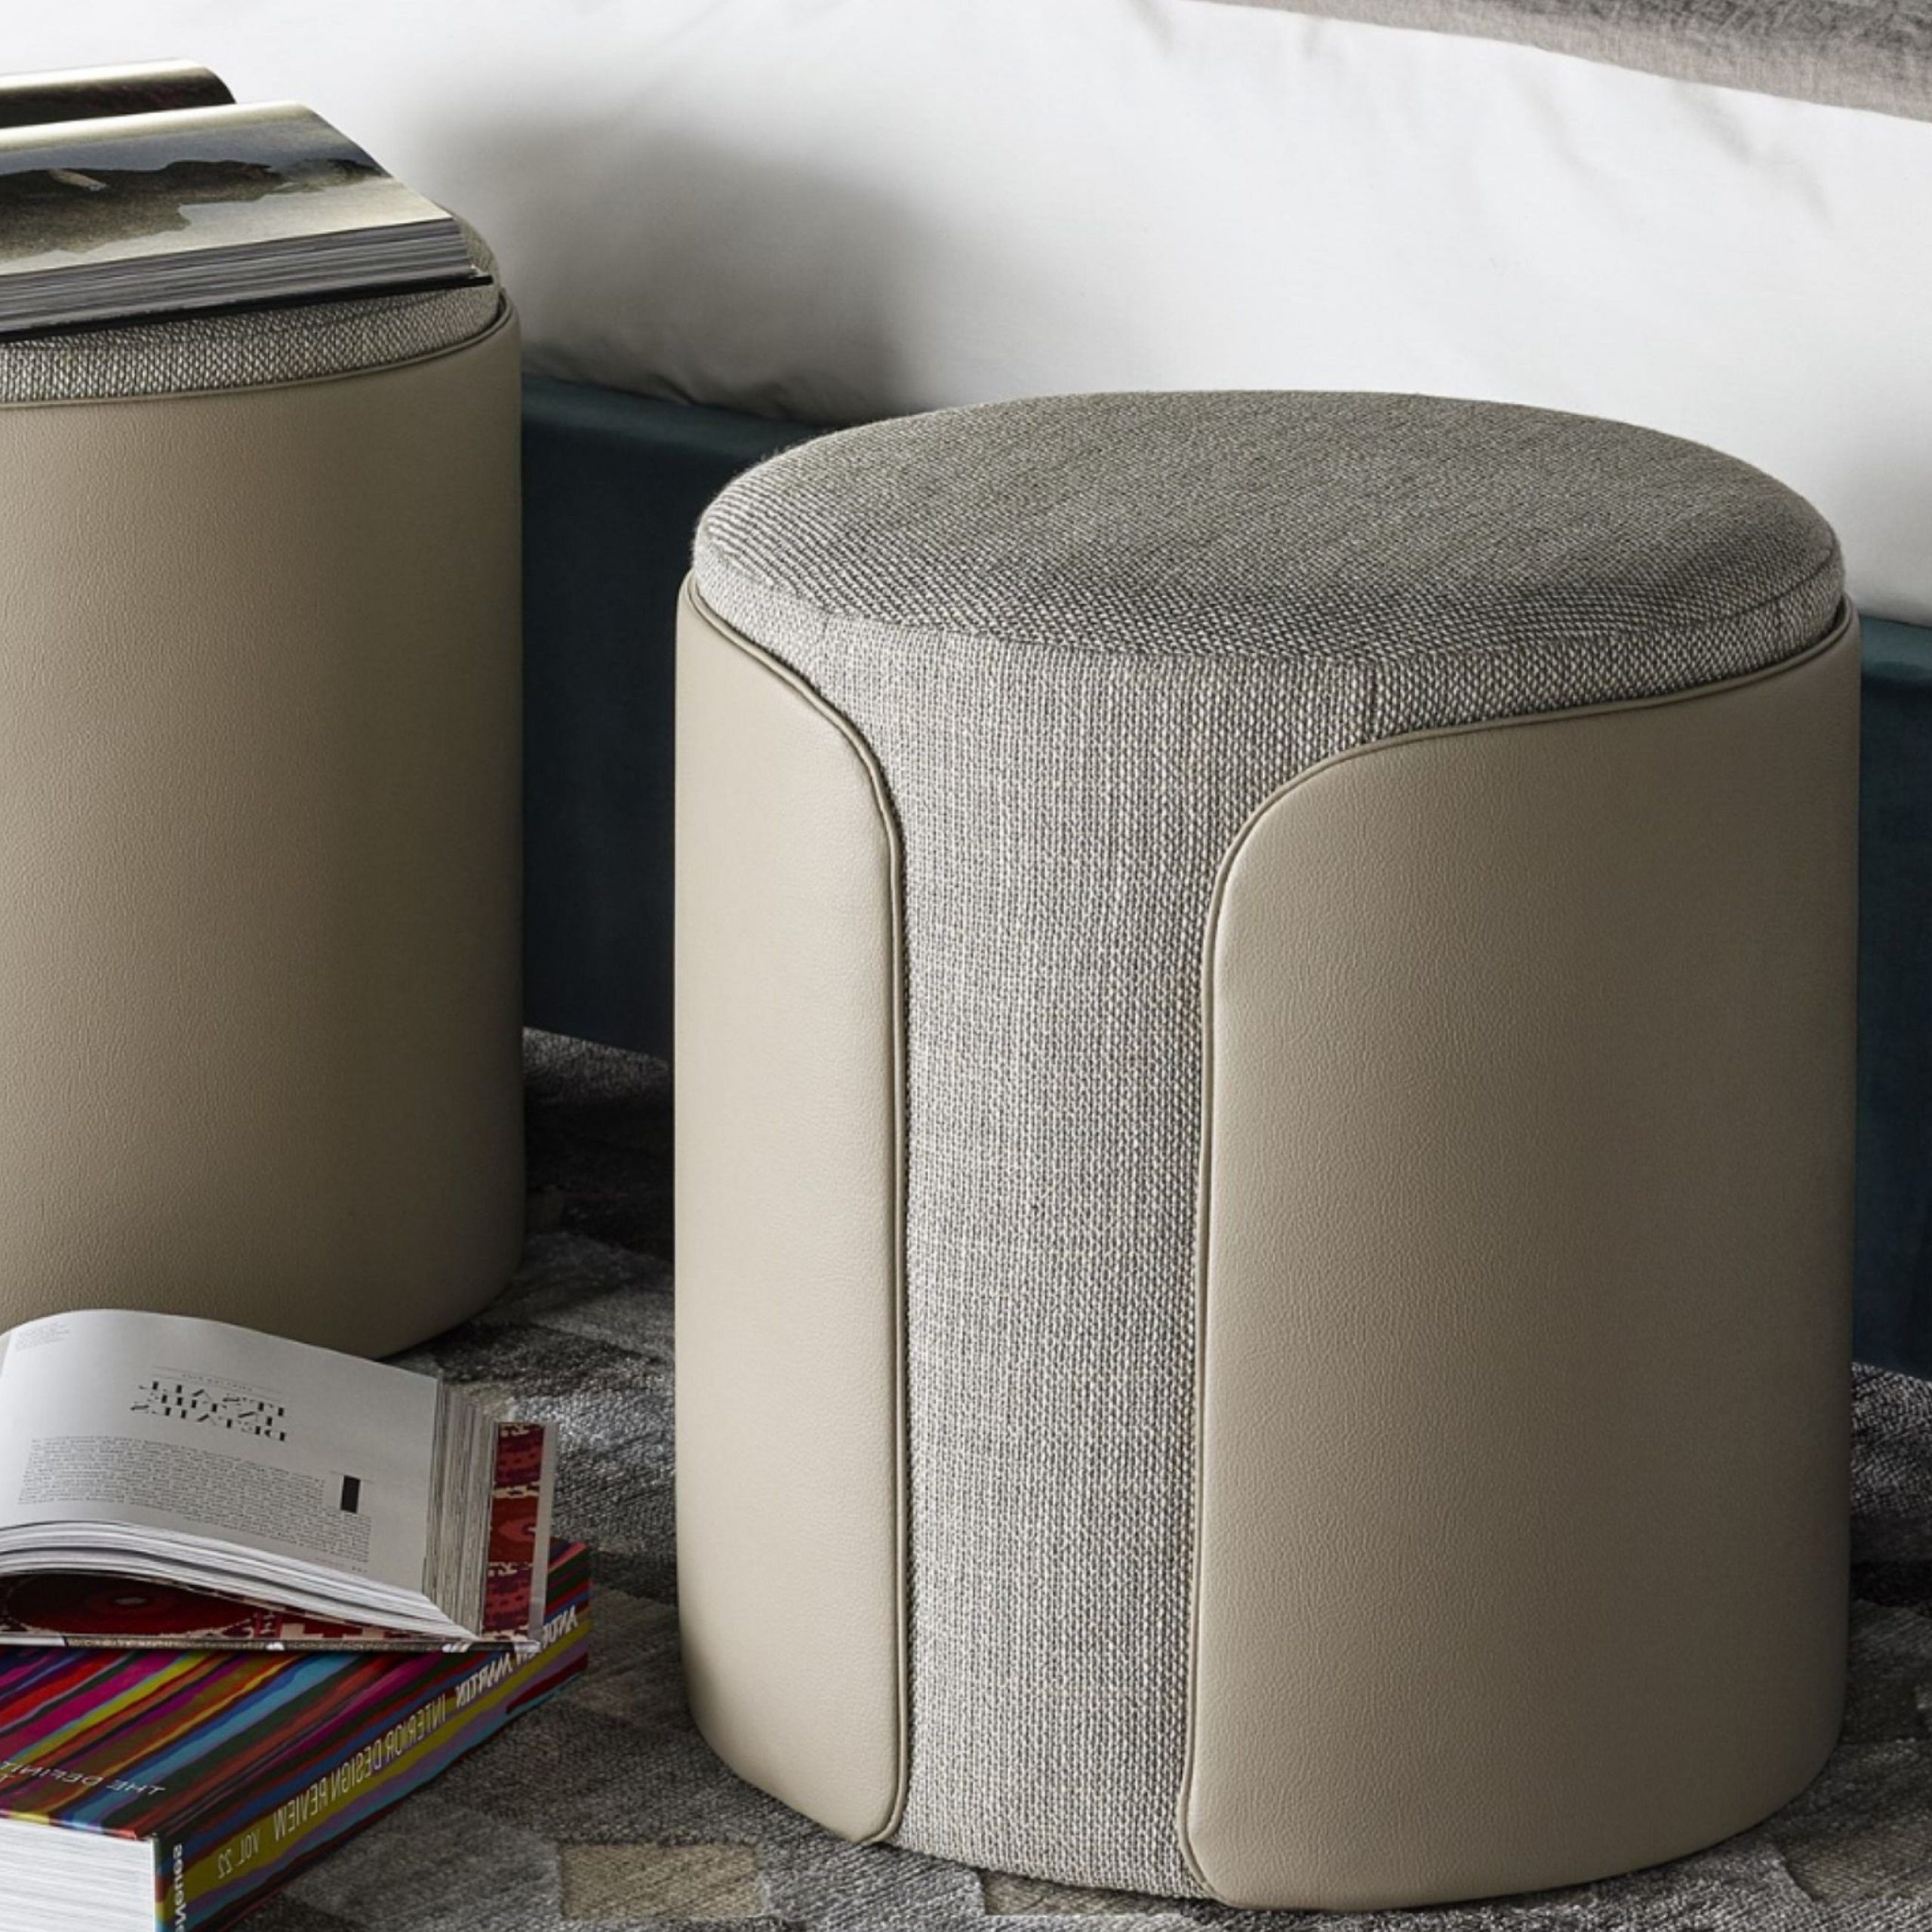 Invite Plush Texture To Living Spaces With The Camille Round Ottoman, A Intended For Well Liked Textured Green Round Pouf Ottomans (View 9 of 10)